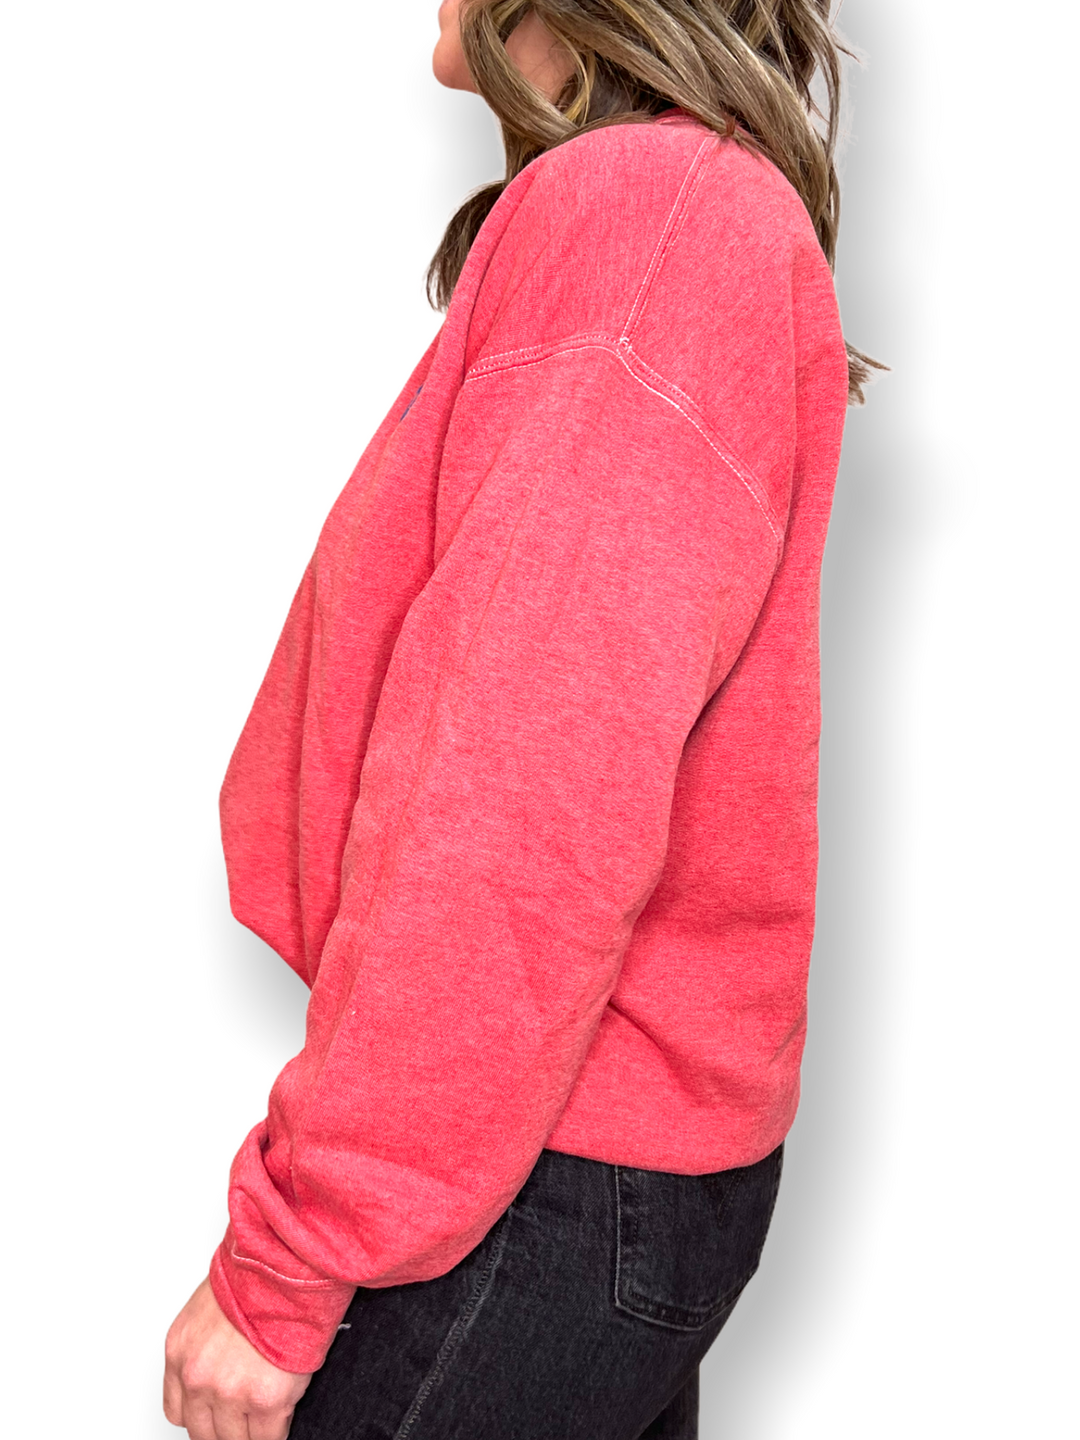 NY APPLE EMBROIDERED SWEATSHIRT - Kingfisher Road - Online Boutique